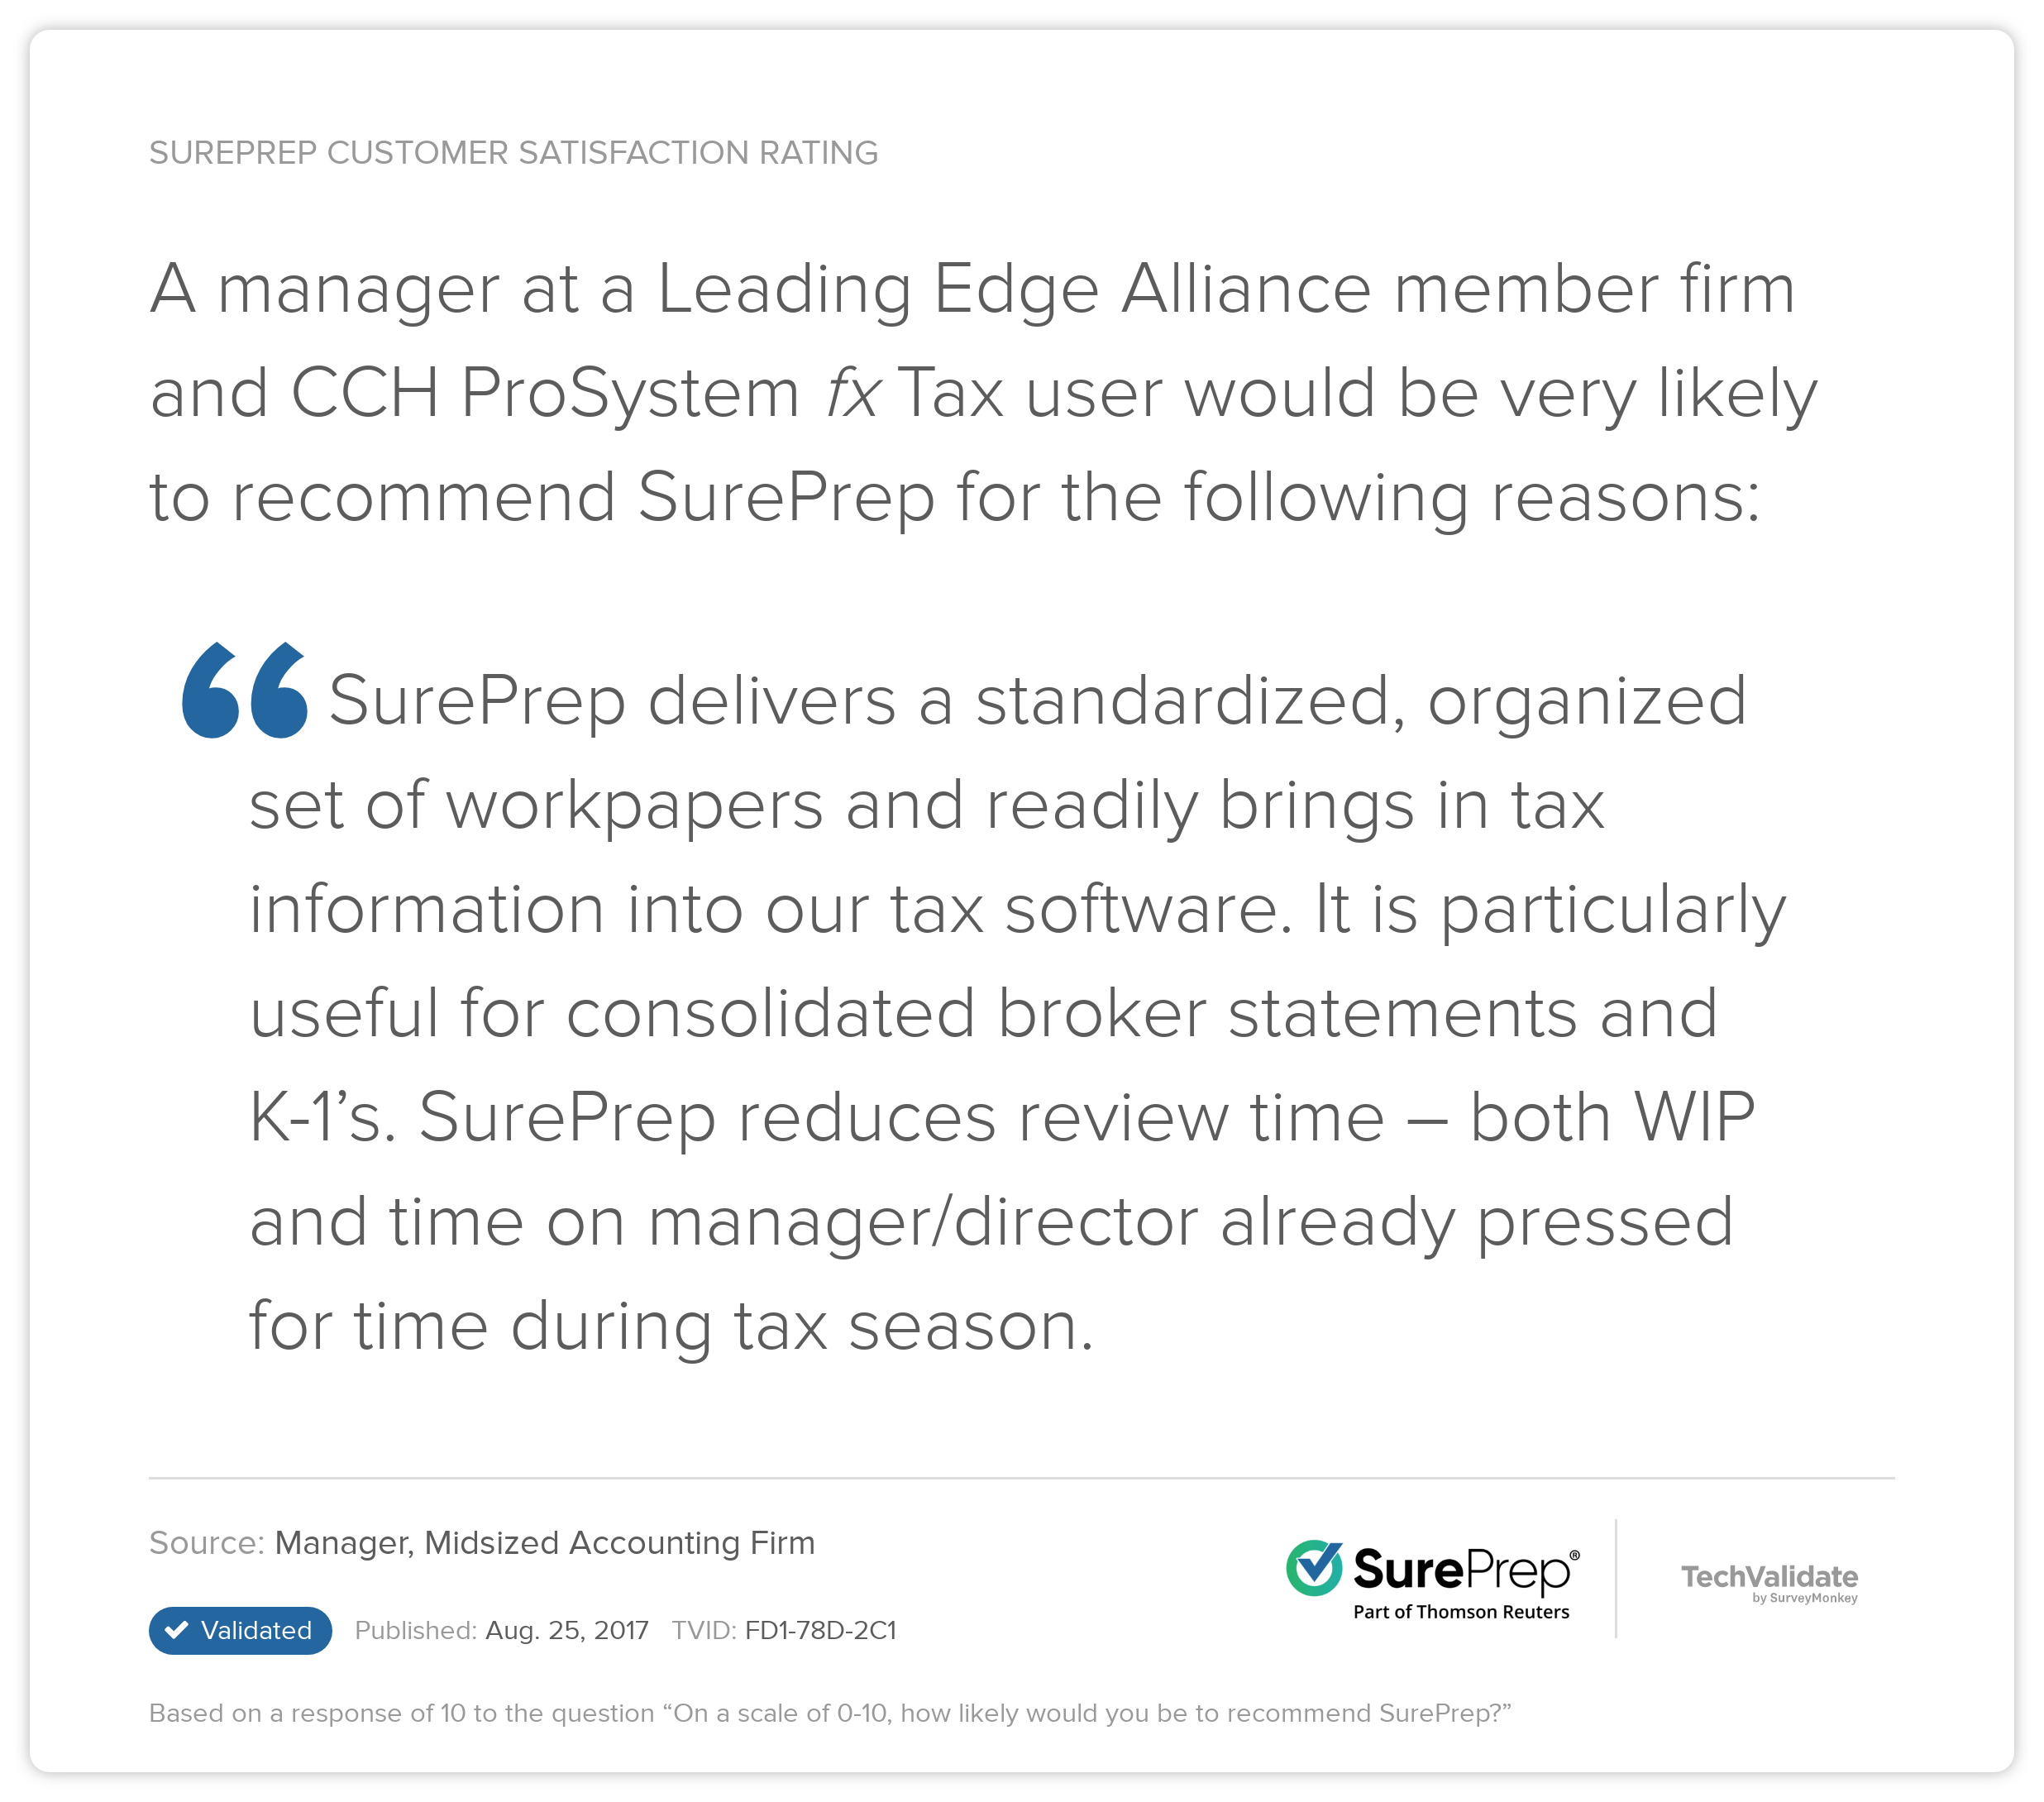 A manager at a Leading Edge Alliance member firm and CCH ProSystem fx Tax user would be very likely to recommend SurePrep for the following reasons: "SurePrep delivers a standardized, organized set of workpapers and readily brings in tax information into our tax software. It is particularly useful for consolidated broker statements and K-1's. SurePrep reduces review time -- both WIP and time on manager/director already pressed for time during tax season."